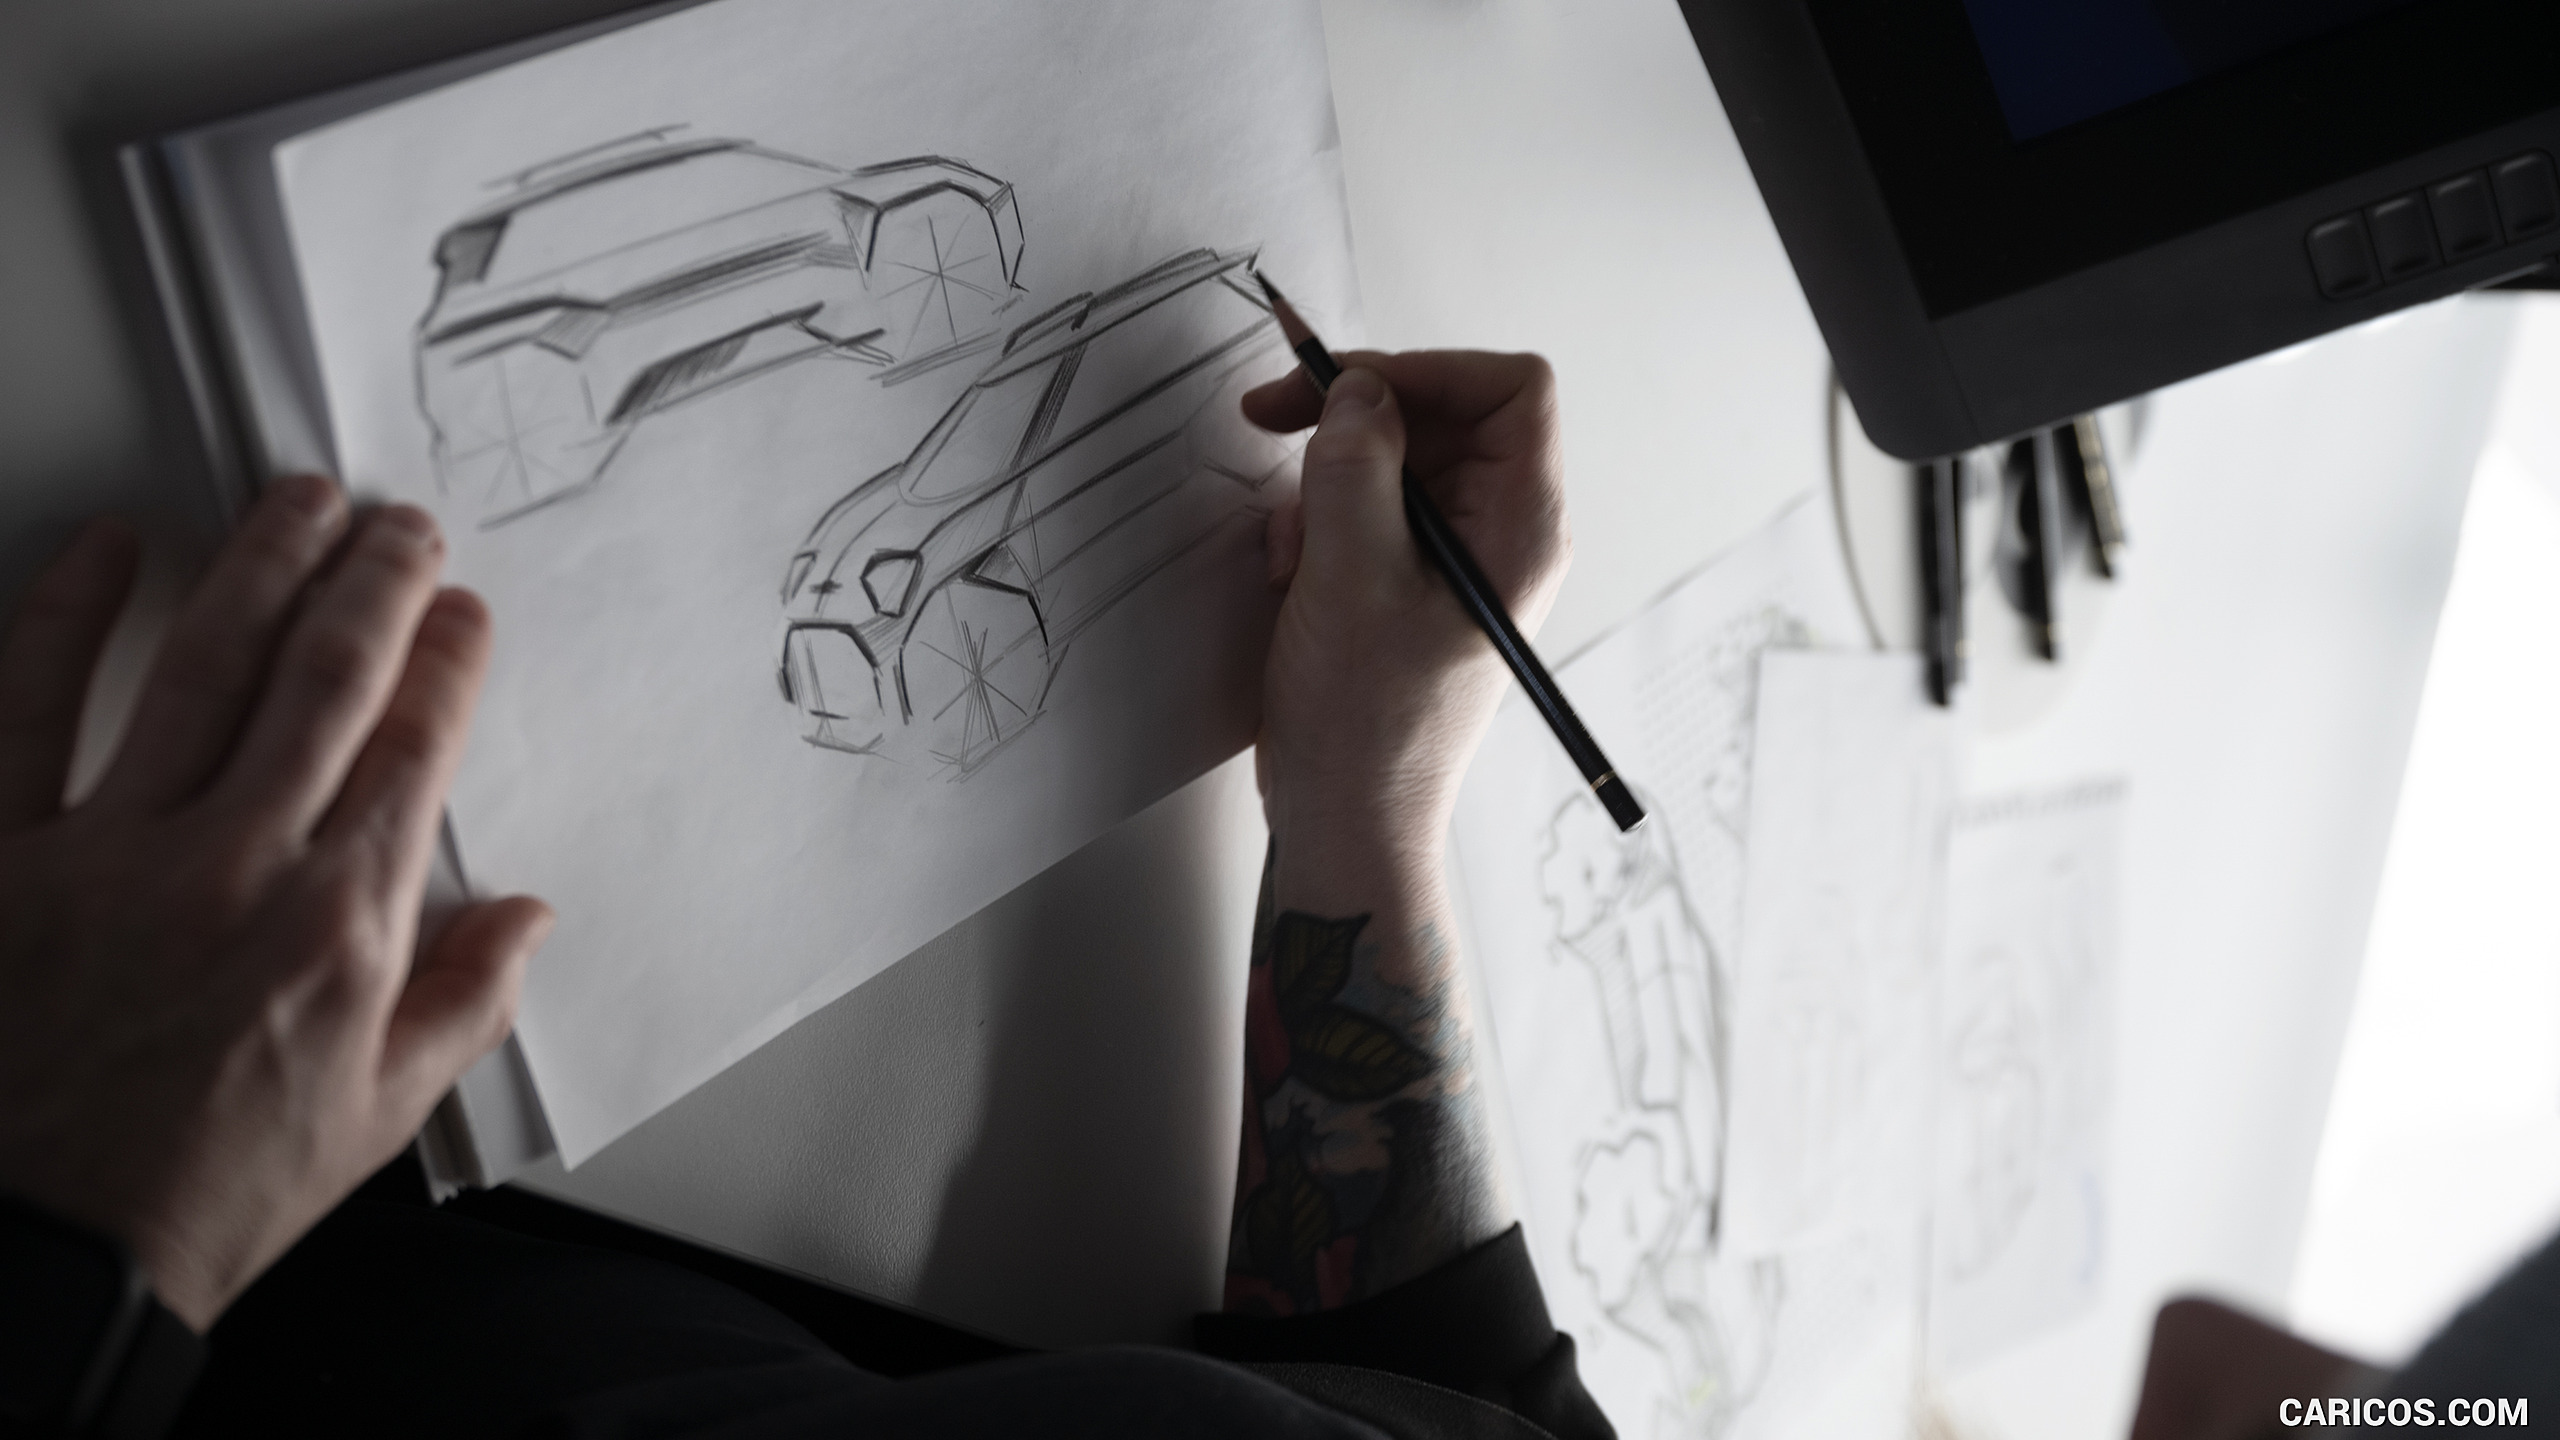 2022 MINI Aceman Concept - Making Of, #89 of 97